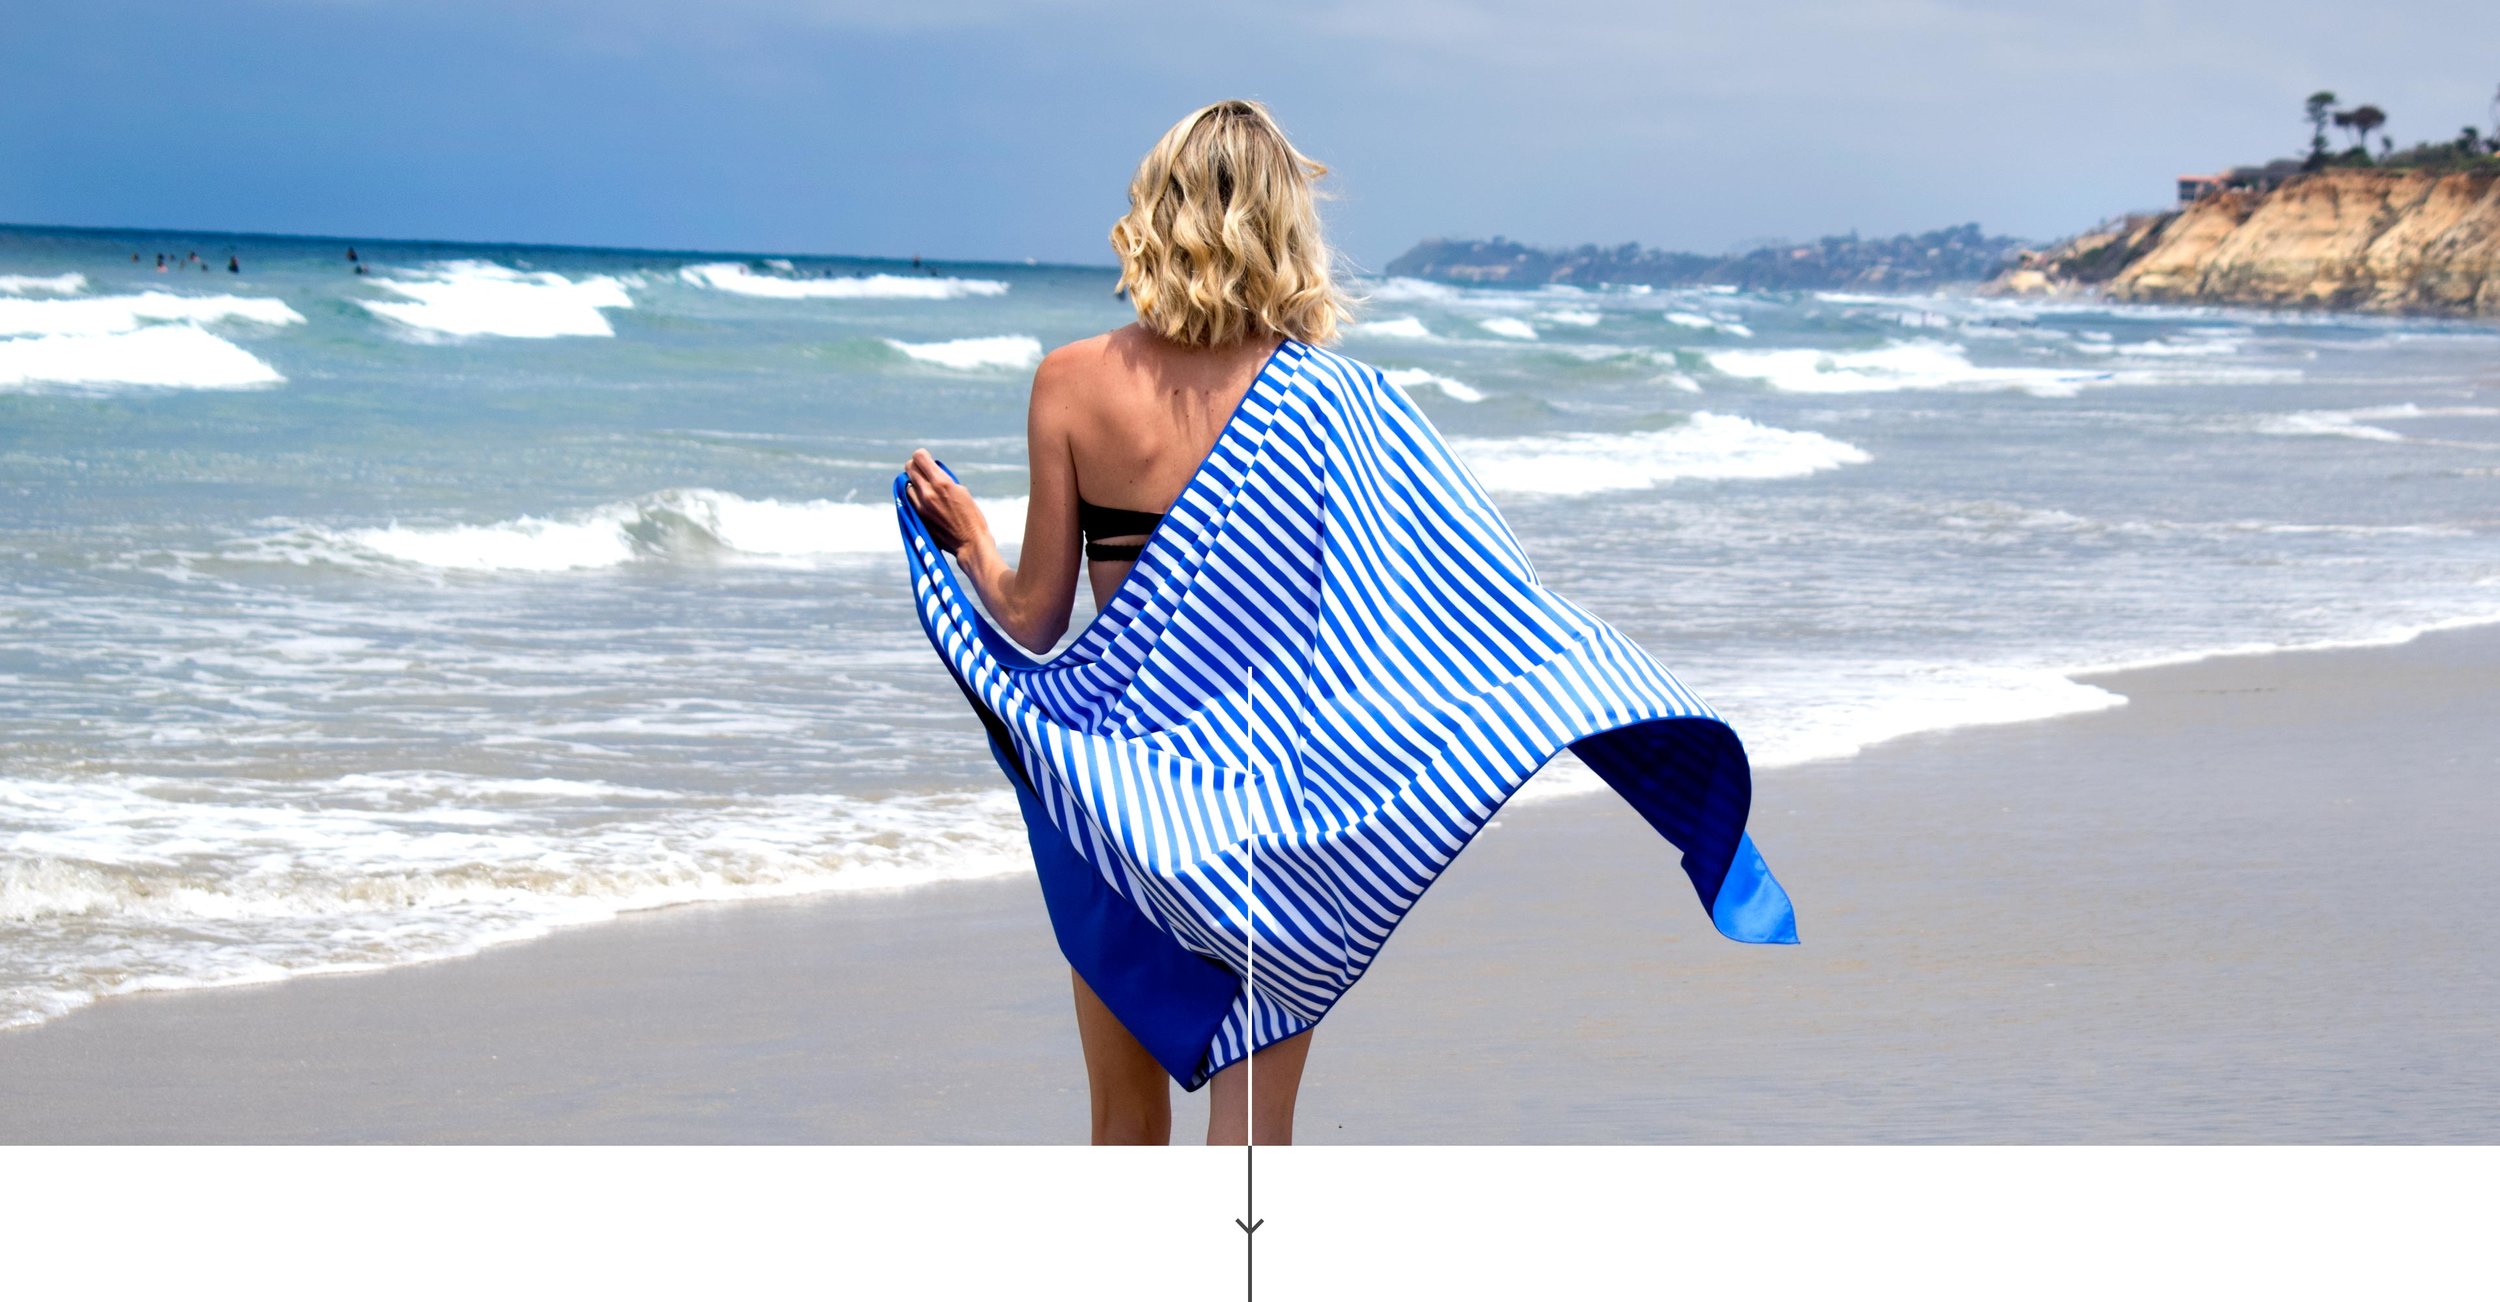 Workout VIVOTE Microfibre Beach Towel Large Striped Portable Pool Travel Camping Towel with Bag 80x180cm Absorbent Lightweight Compact Perfect for Swimming Yoga Bath Sky Blue Stripe Gym